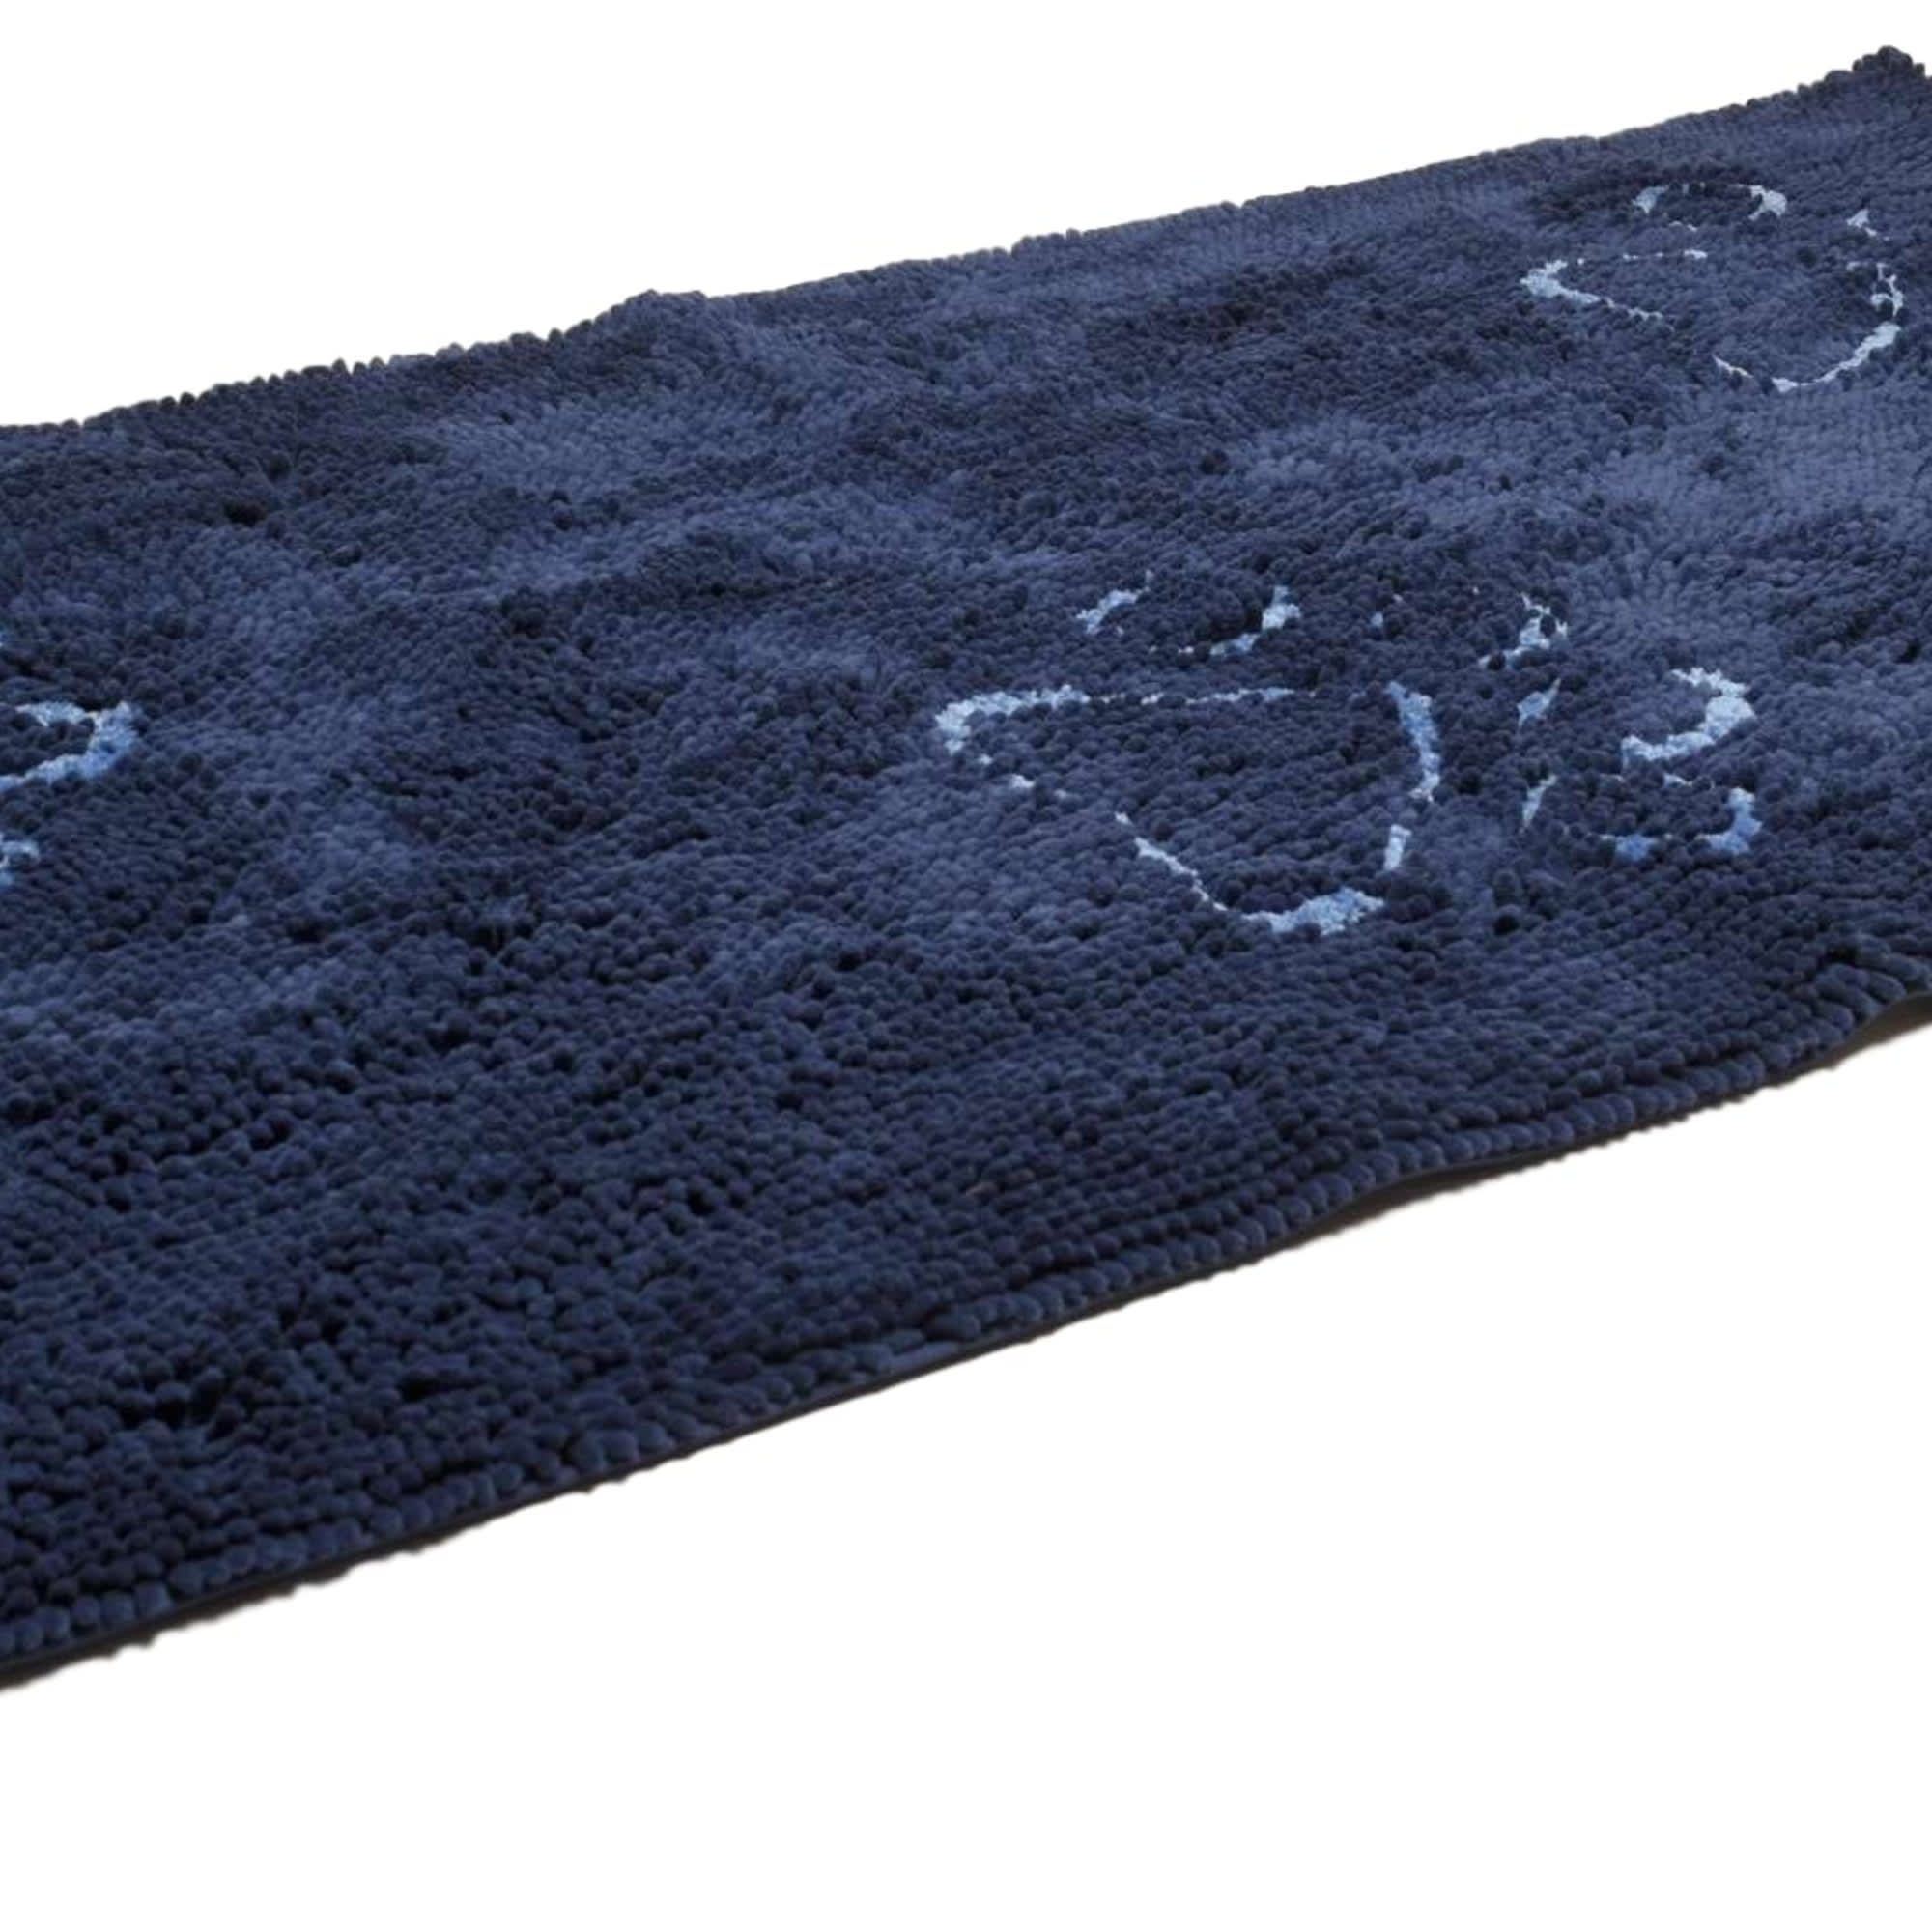 Dog Gone Smart Dirty Dog Bermuda Blue Doormat Runner for Dogs, 60" L X 30" W, XX-Large